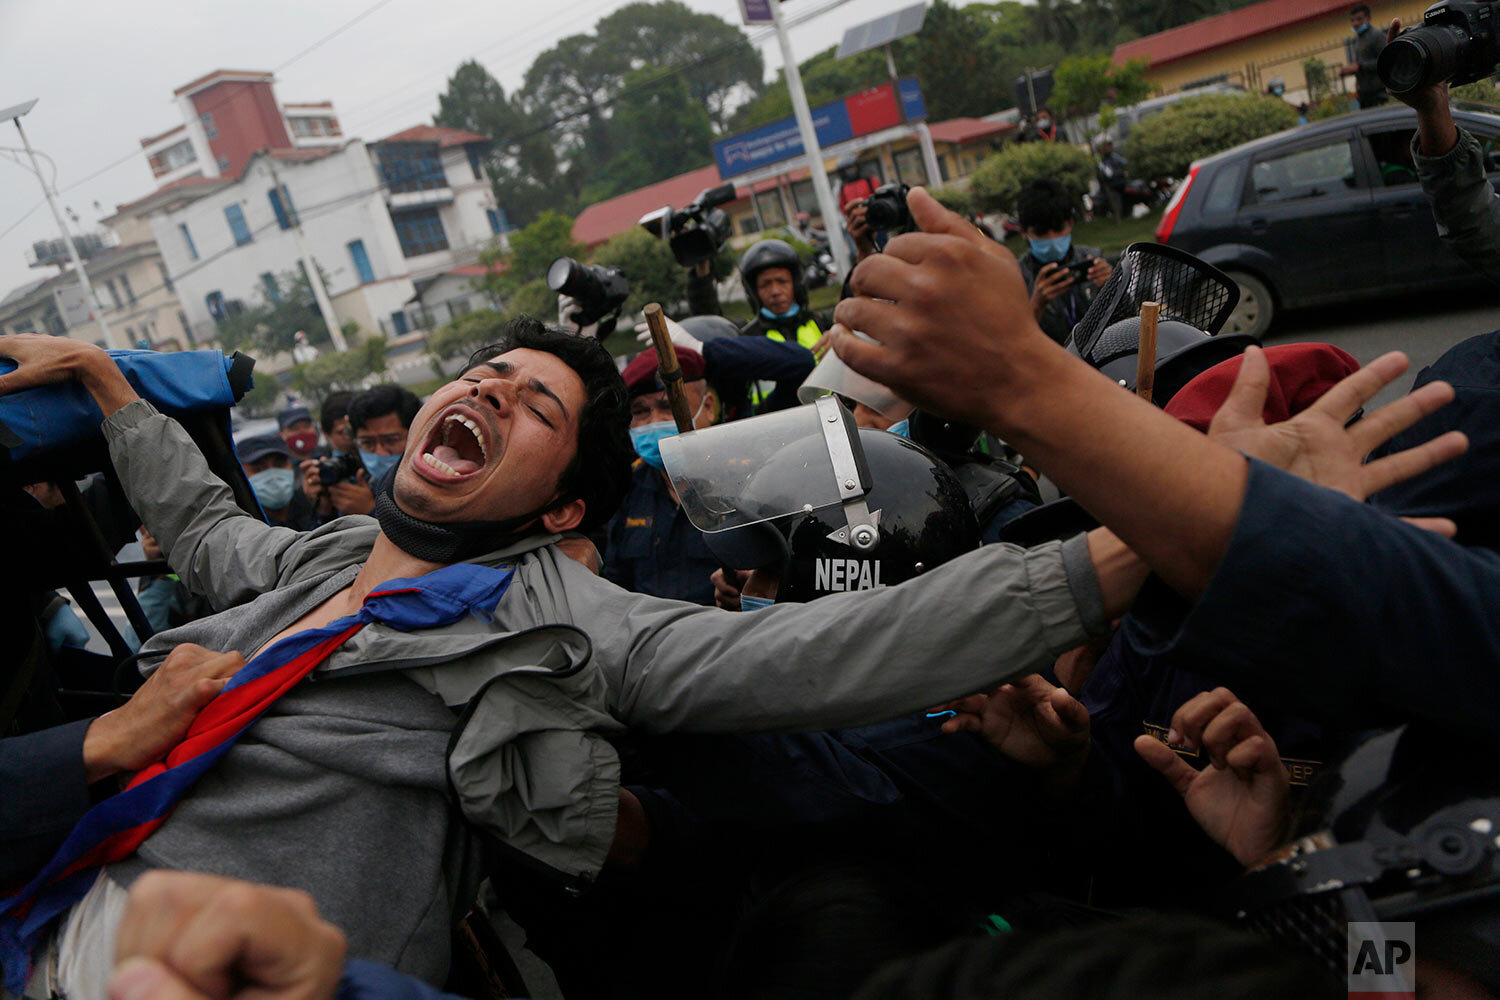  Nepalese students shout slogans as they are detained by policemen during a protest amid lockdown in Kathmandu, Nepal, Monday, May 11, 2020. (AP Photo/Niranjan Shrestha) 